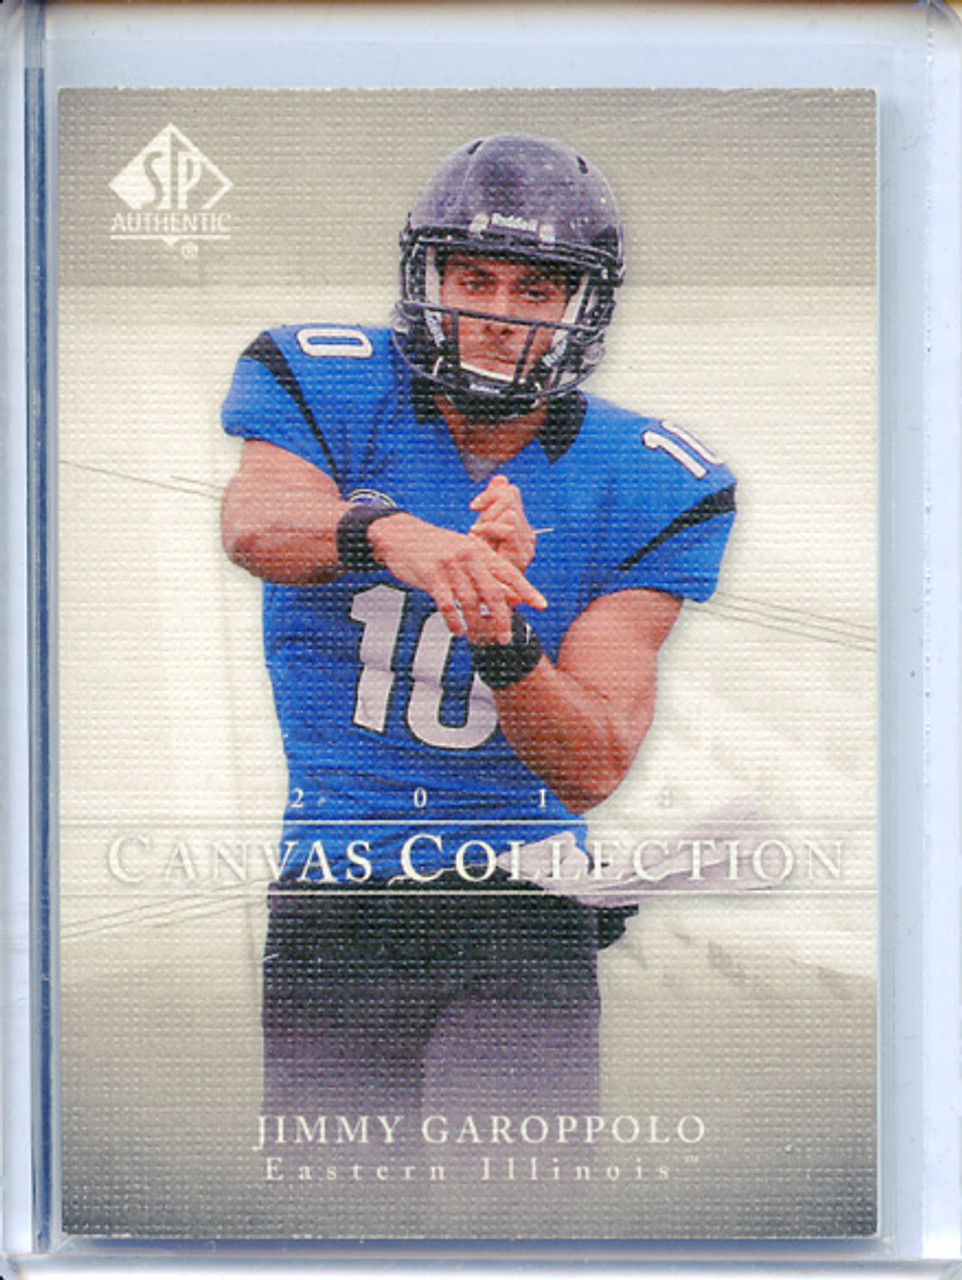 Jimmy Garoppolo 2014 SP Authentic, Canvas Collection #C-5